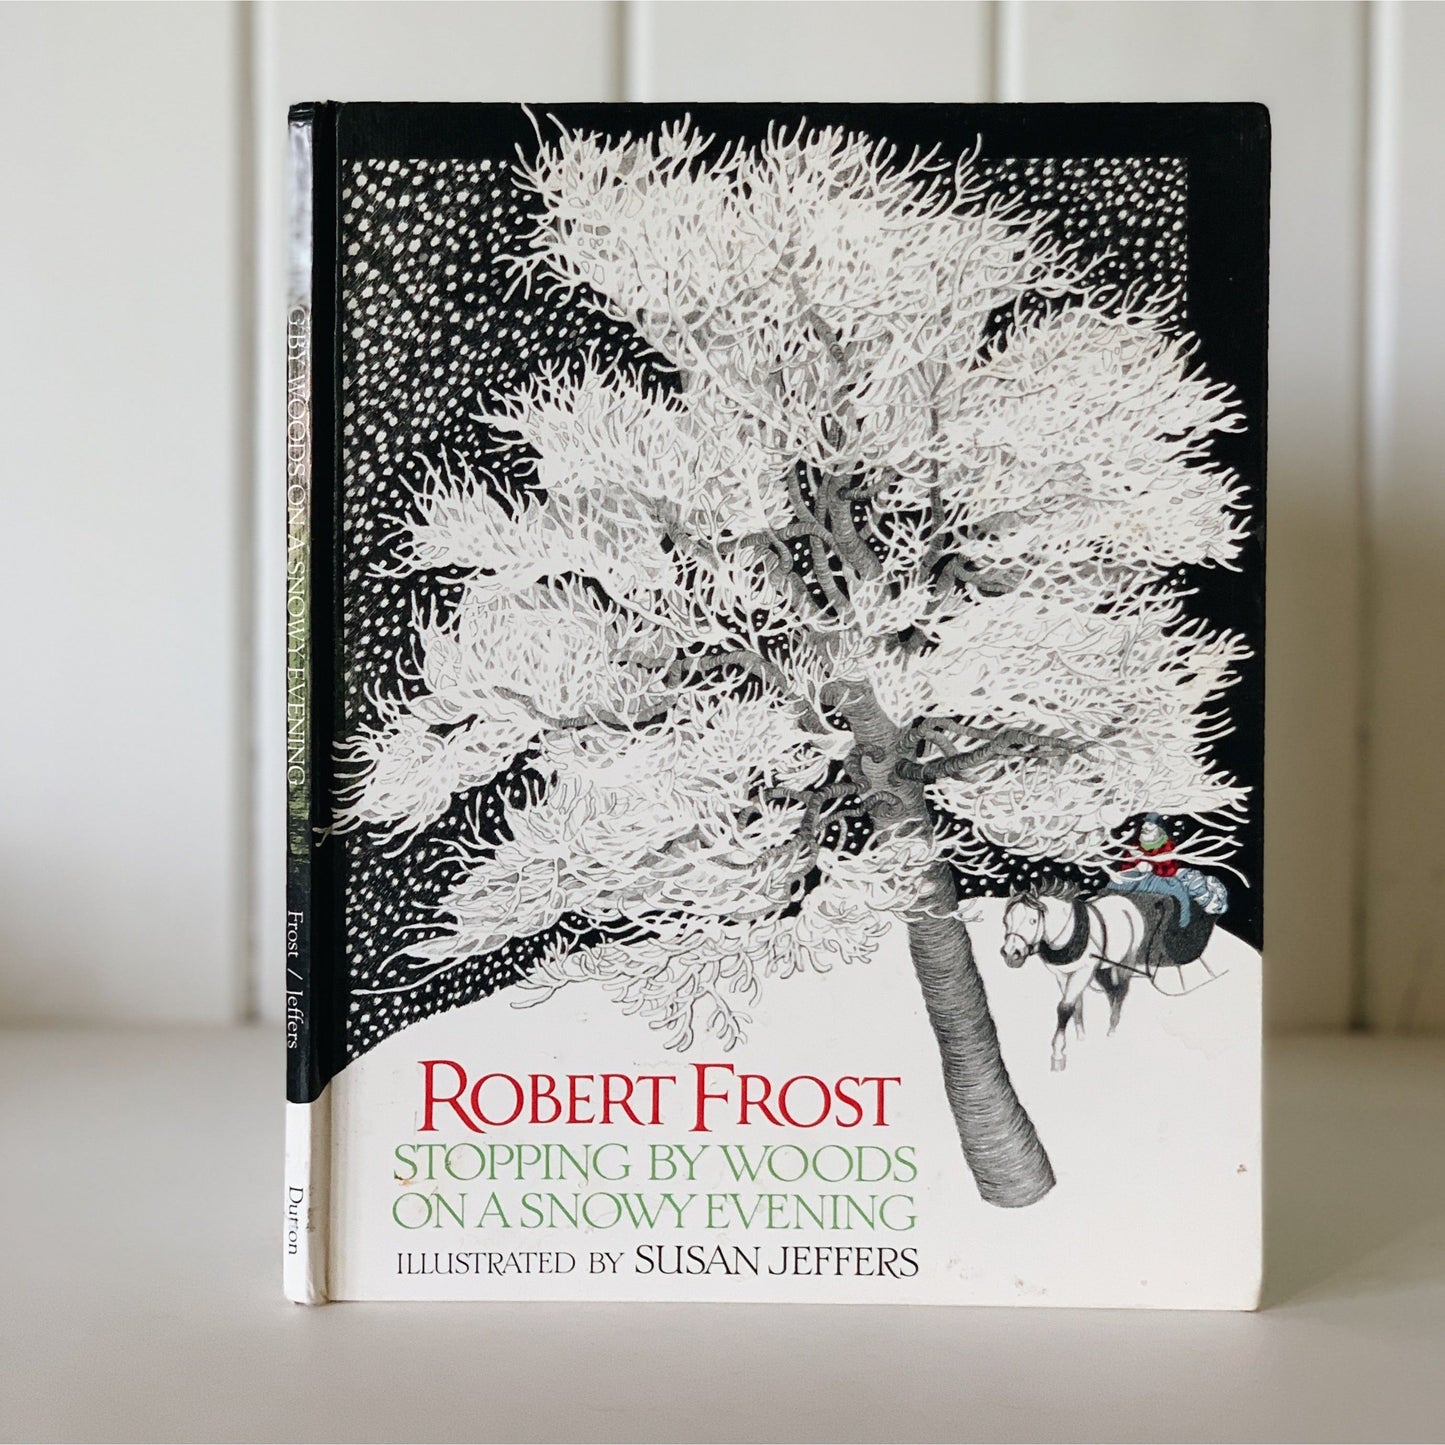 Stopping By Woods on a Snowy Evening, Robert Frost, Illustrated Poetry Book, Hardcover, 1978